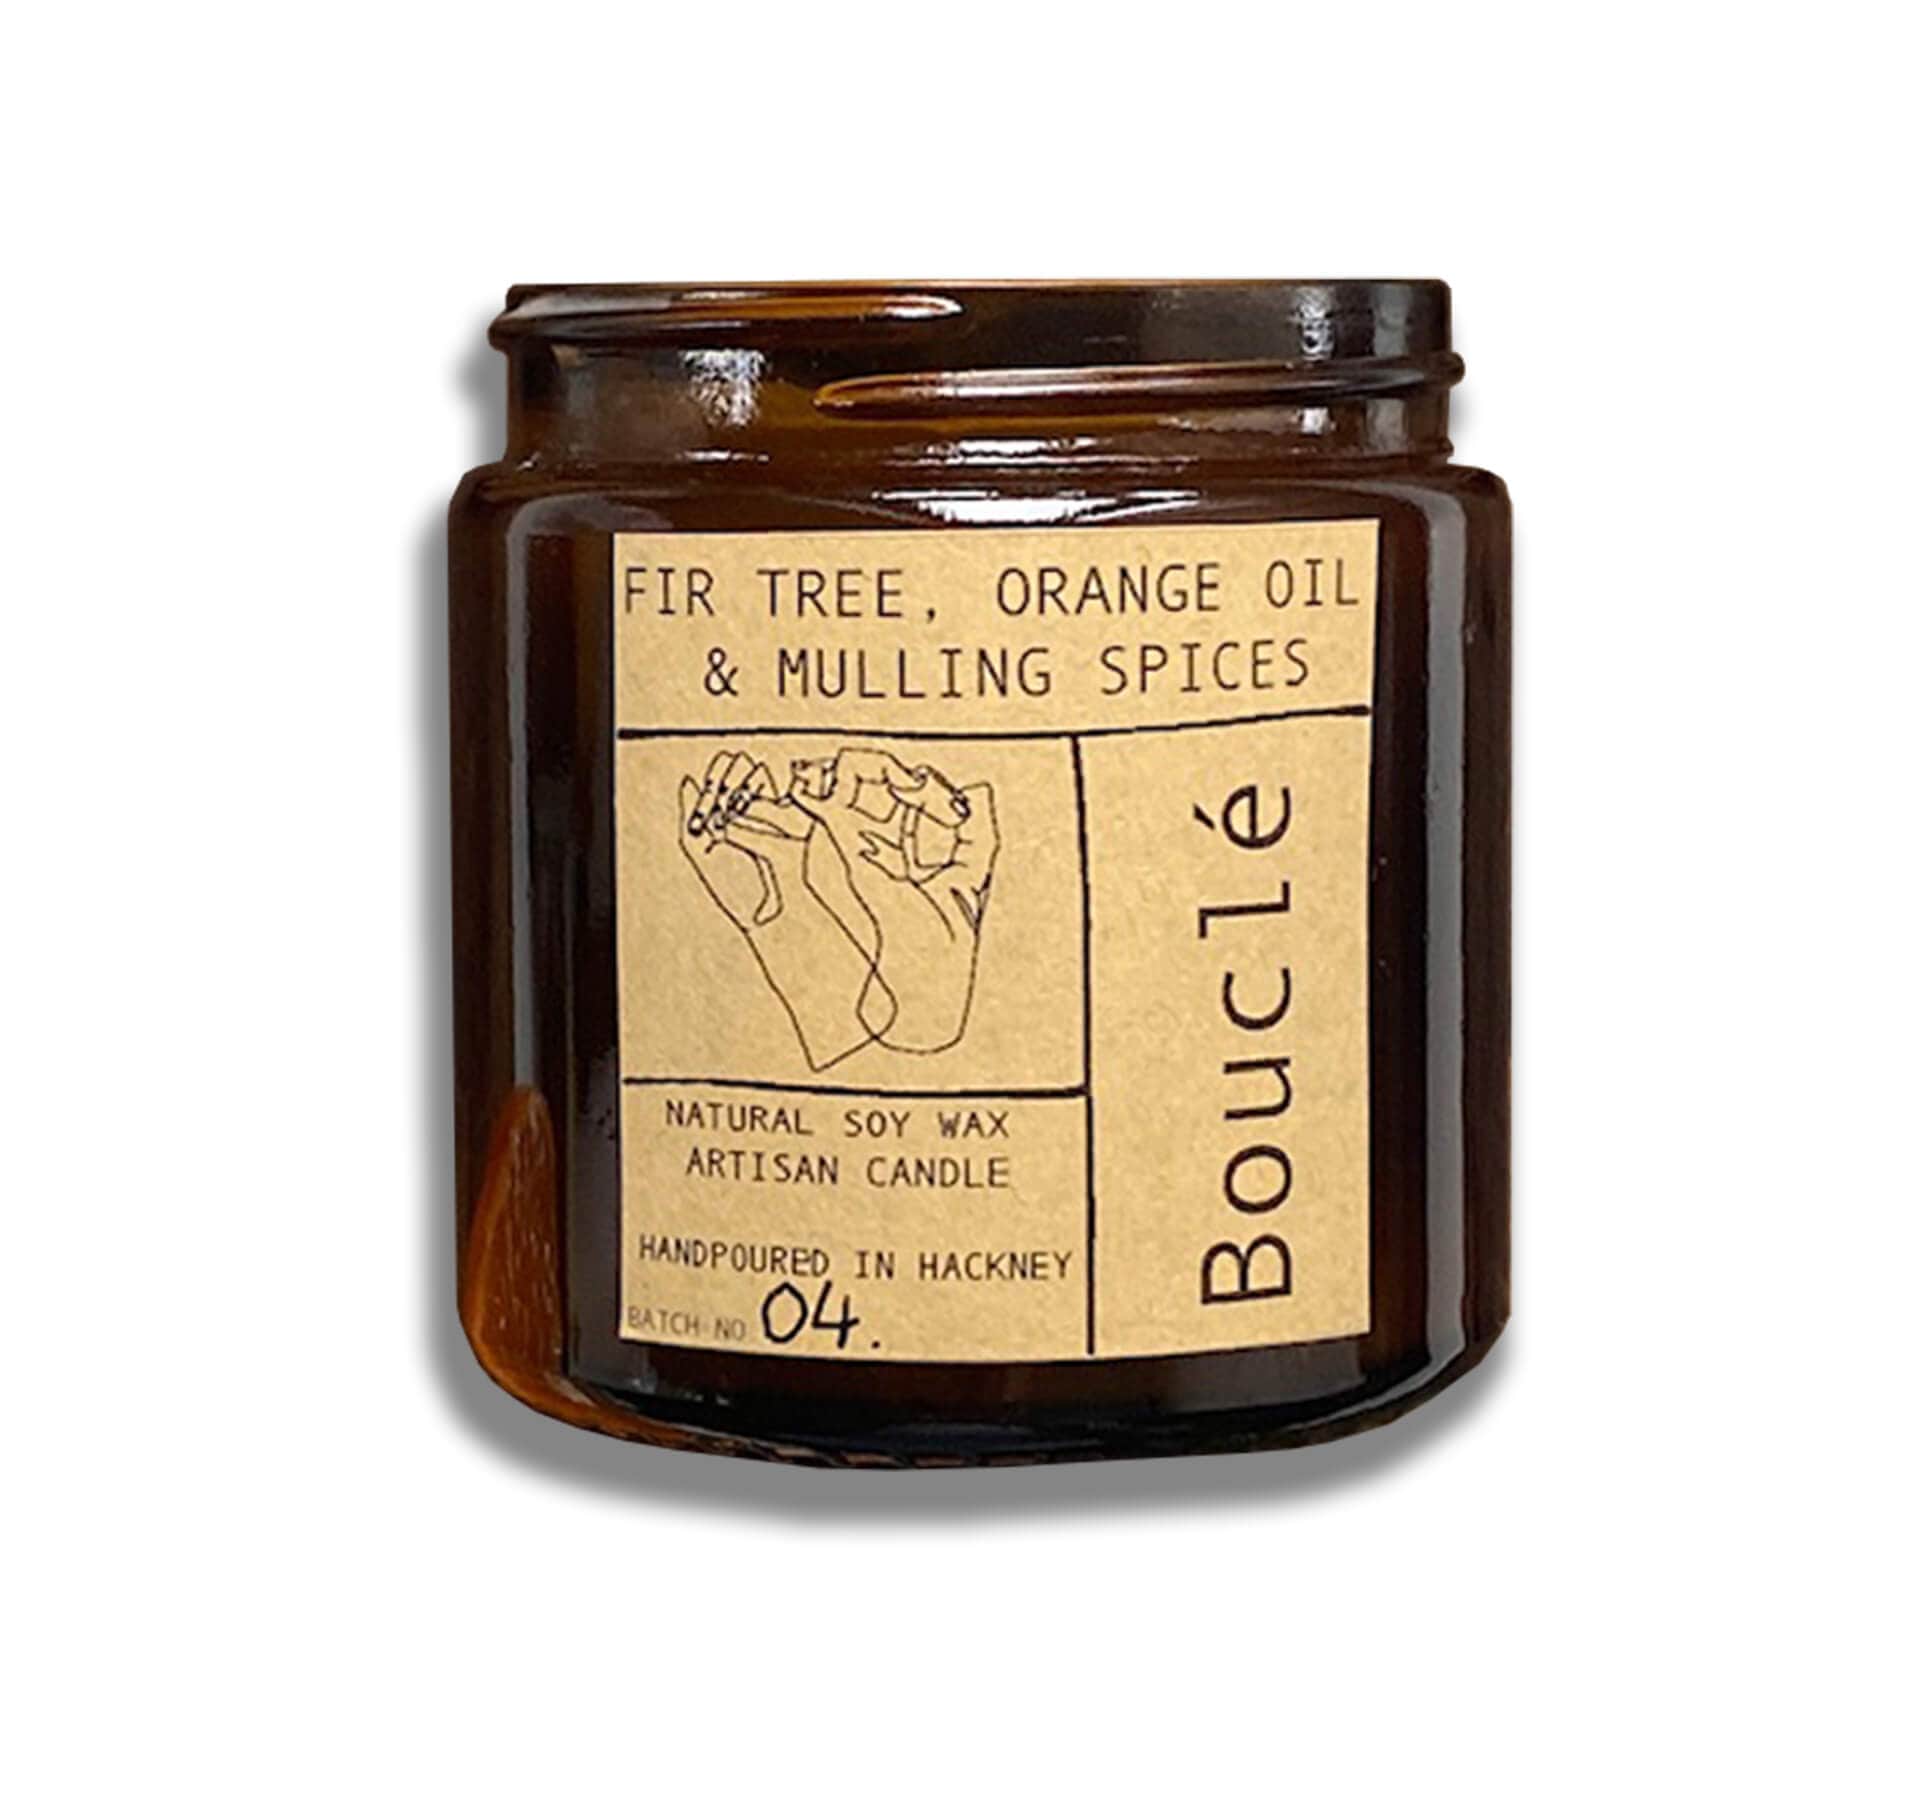 Bouclé Candle Christmas Candle: Fir Tree, Orange Oil & Mulling Spices